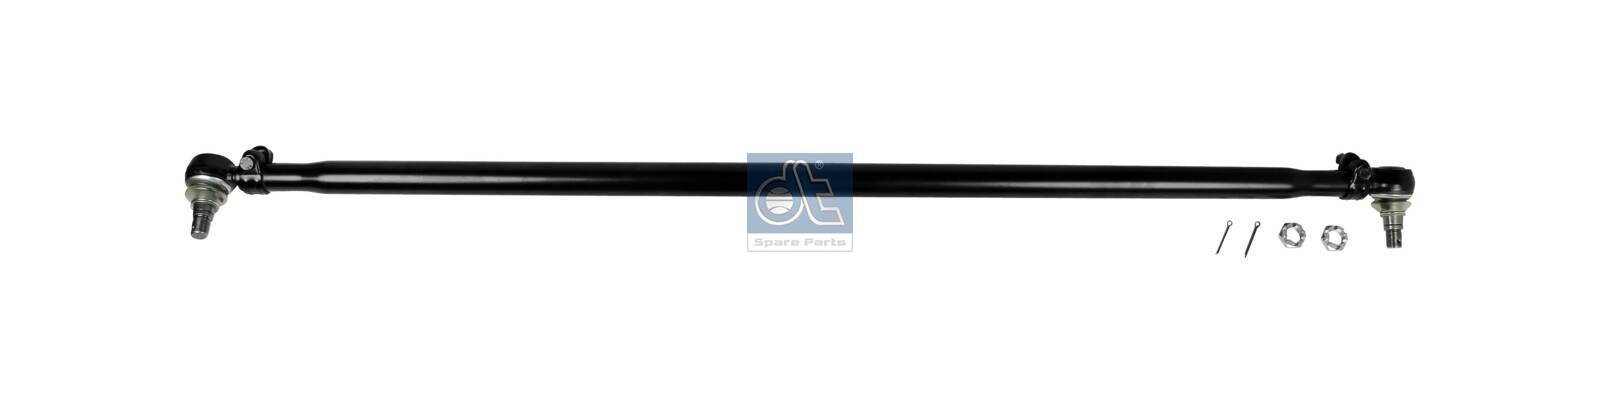 DT Spare Parts 6.53015 Rod Assembly 50 00 786 902